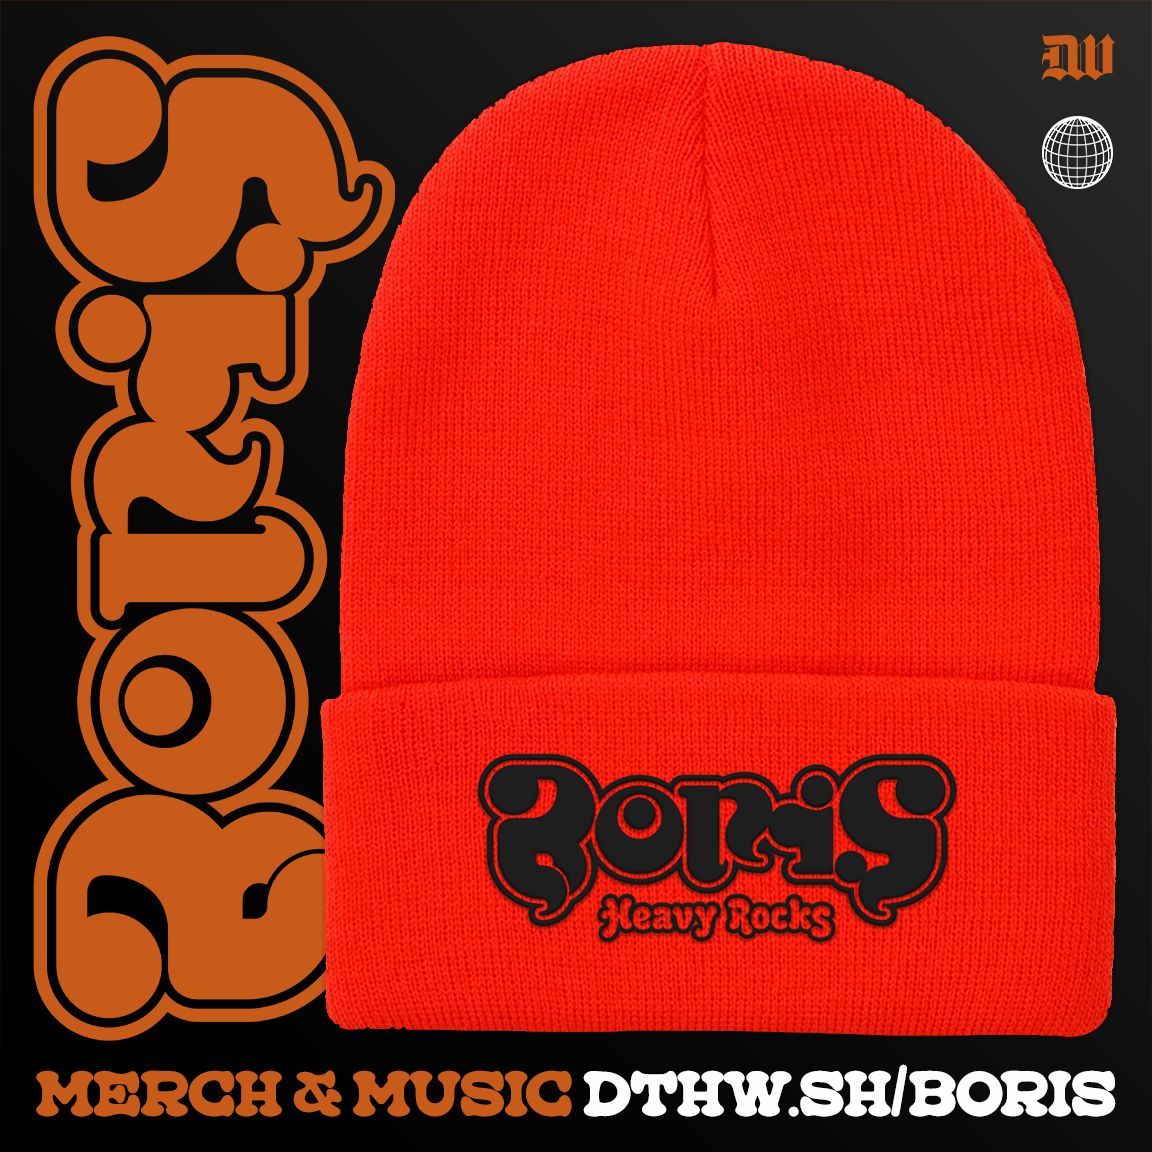 Boris 'Heavy Rocks' 2024 Drop Merch & Music → dthw.sh/boris Boris and Deathwish have teamed up to bring you a new line of apparel from their 'Heavy Rocks' album. All items are available now from deathwishinc.com and deathwishinc.eu